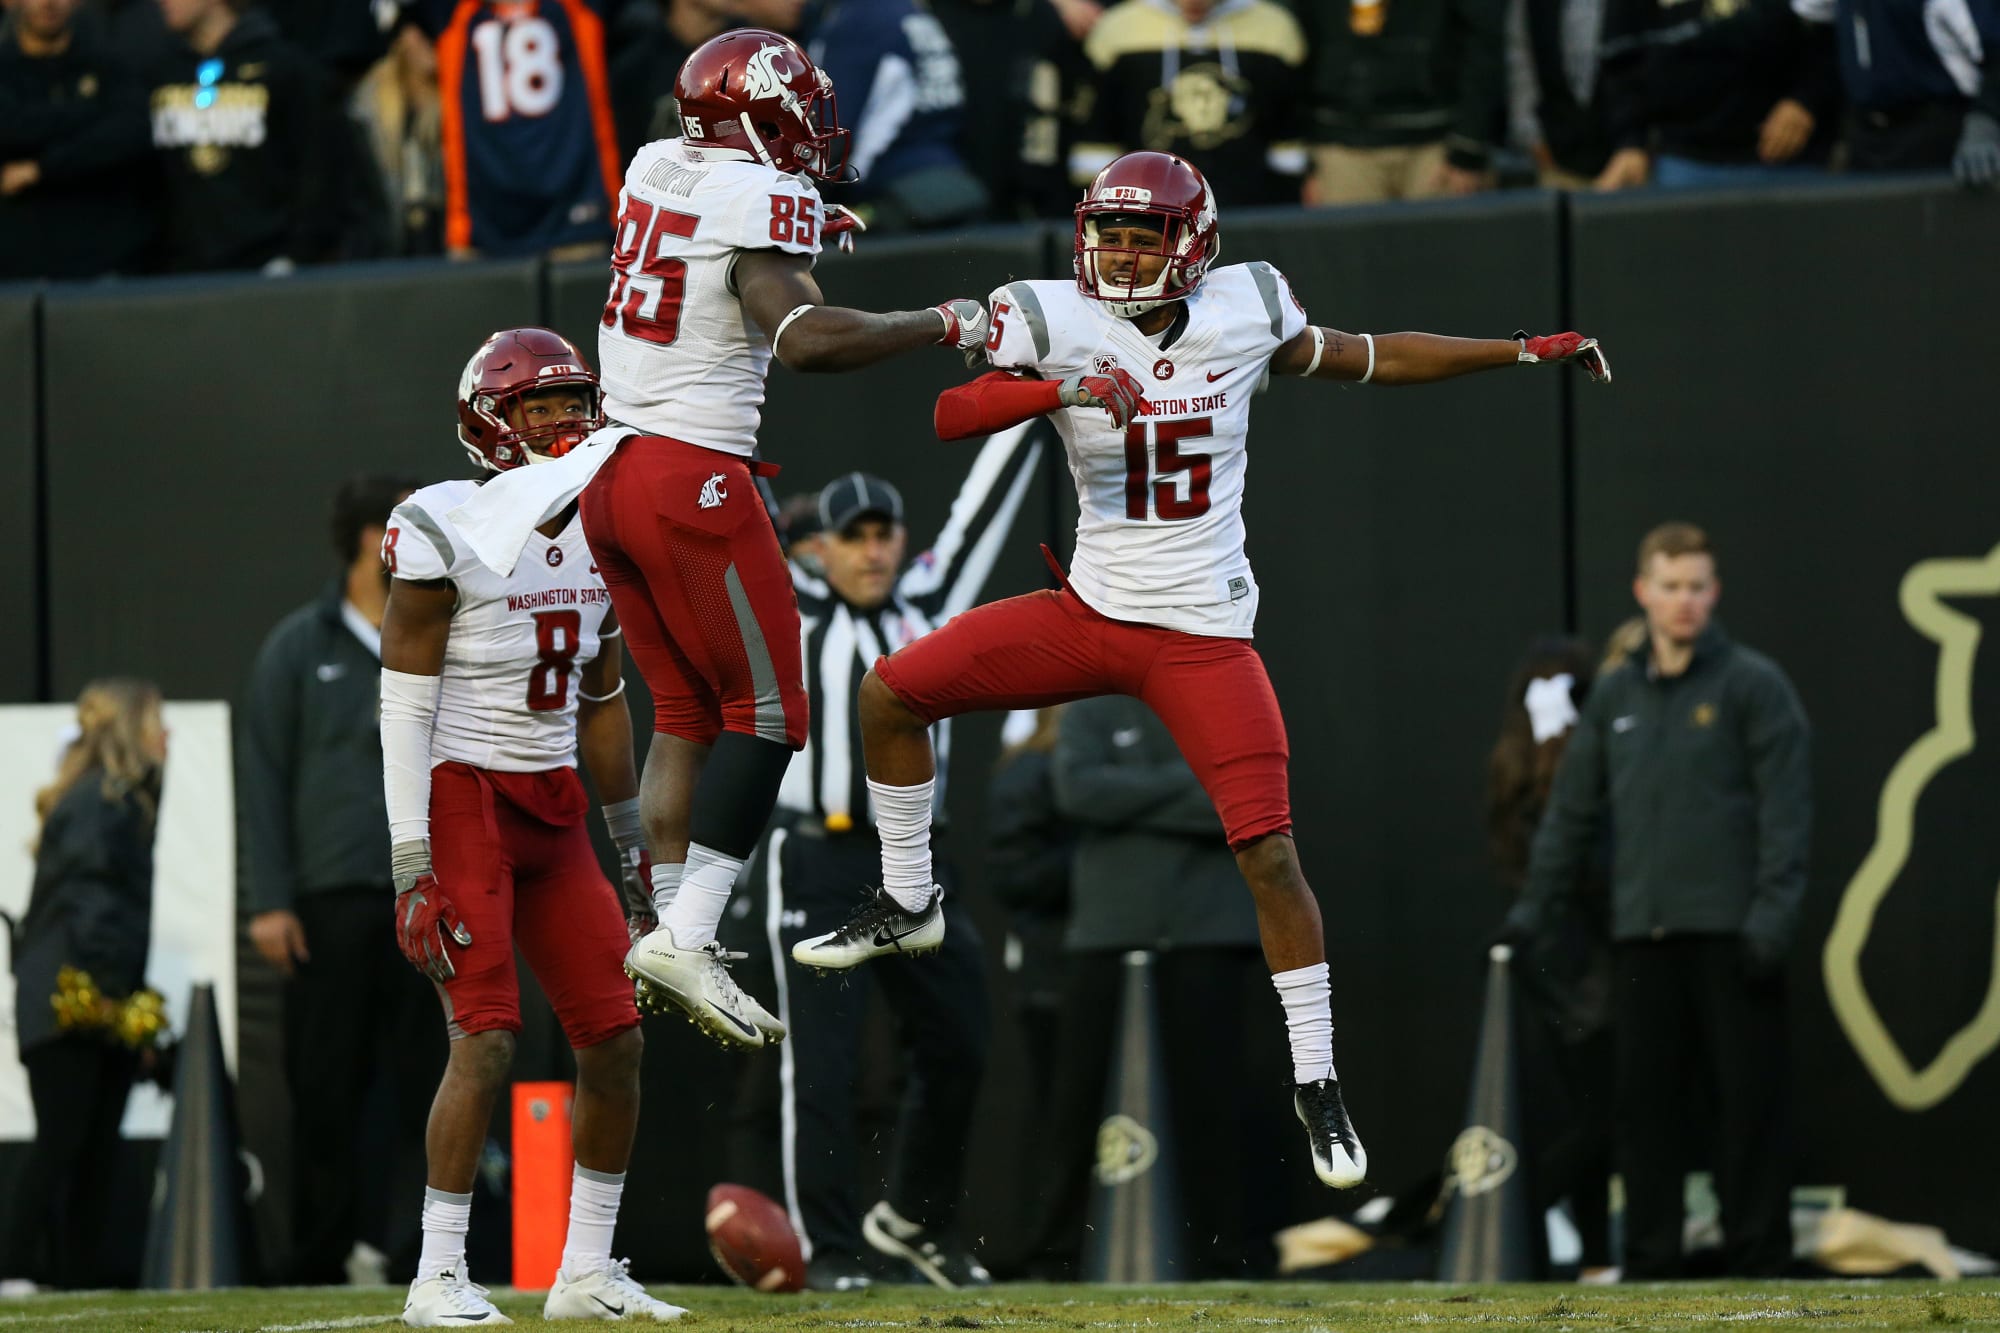 Washington State Football 3 things we learned from Boise State win